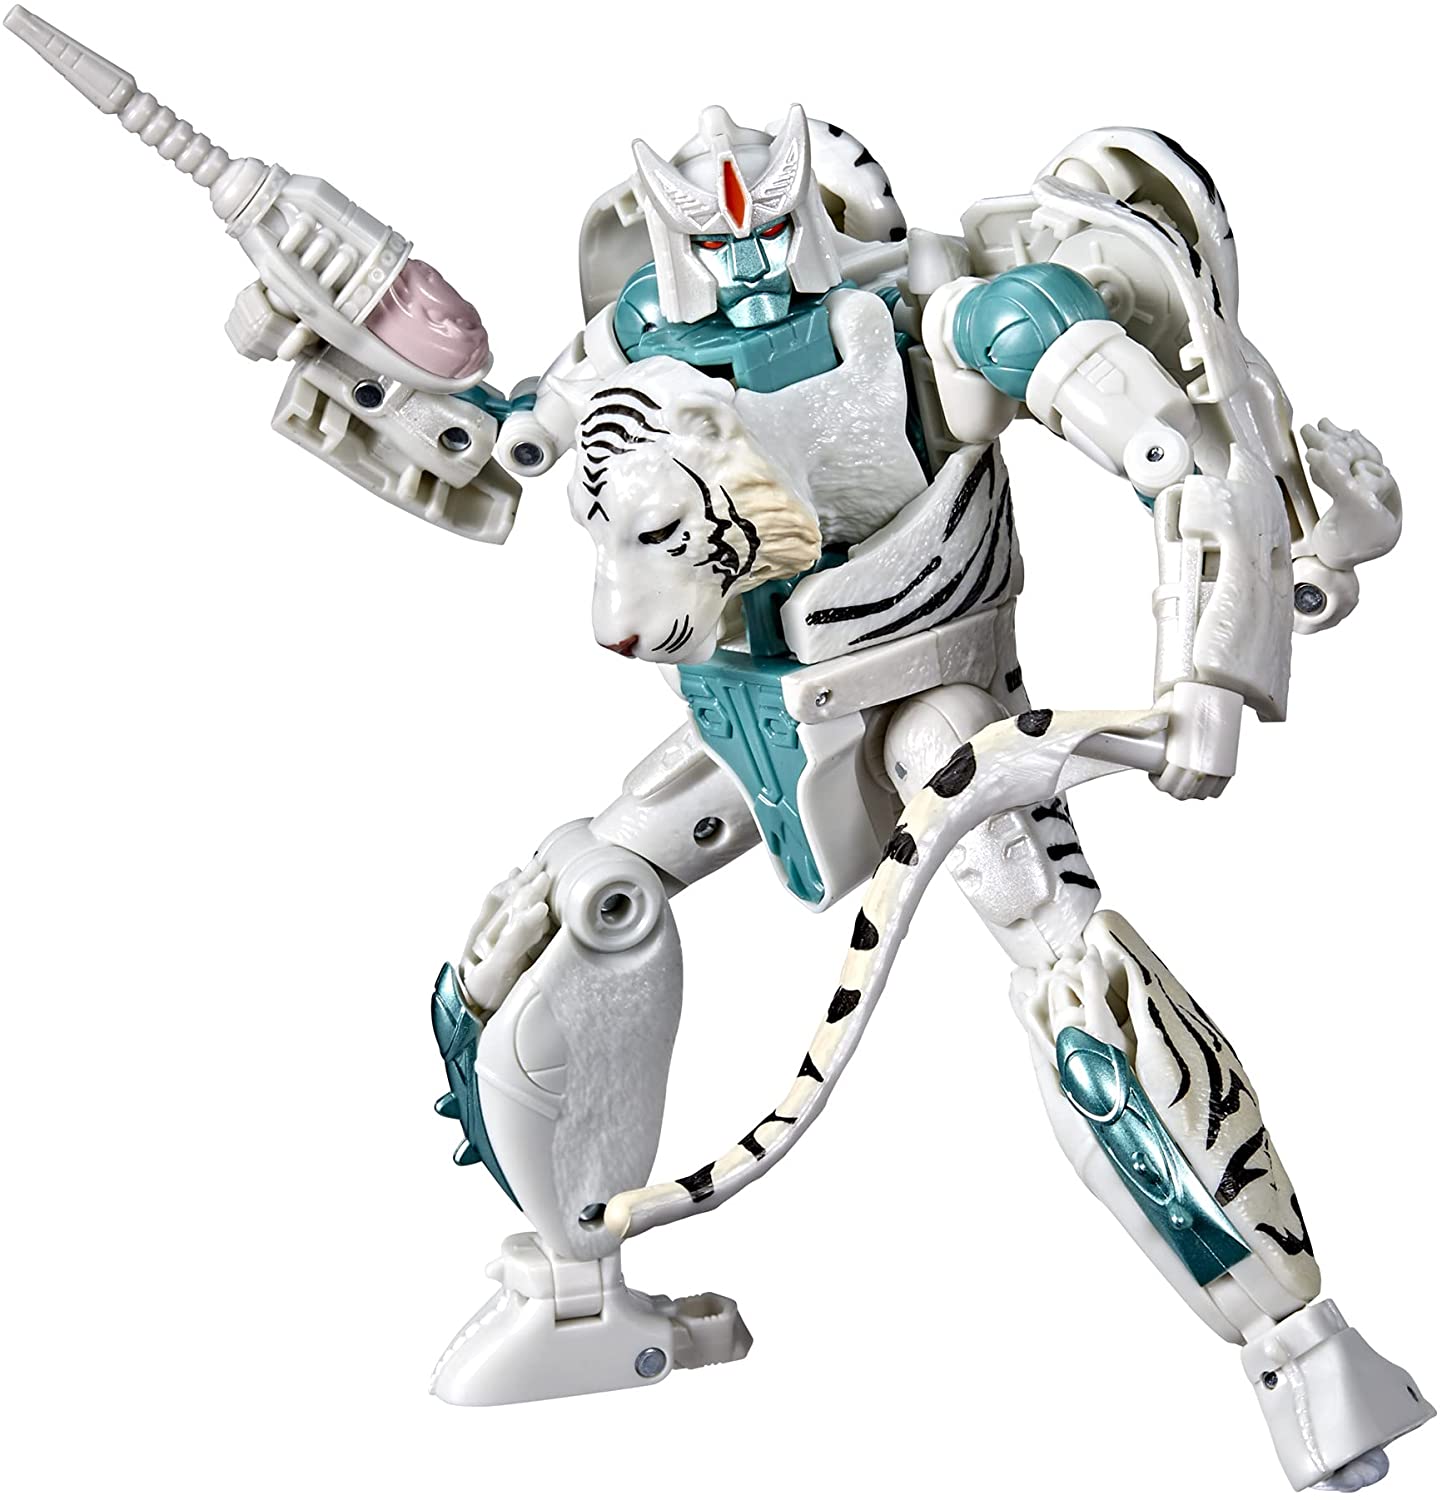 Transformers Toys Generations War for Cybertron: Kingdom Voyager WFC-K35 Tigatron Action Figure - Action & Toy Figures Heretoserveyou